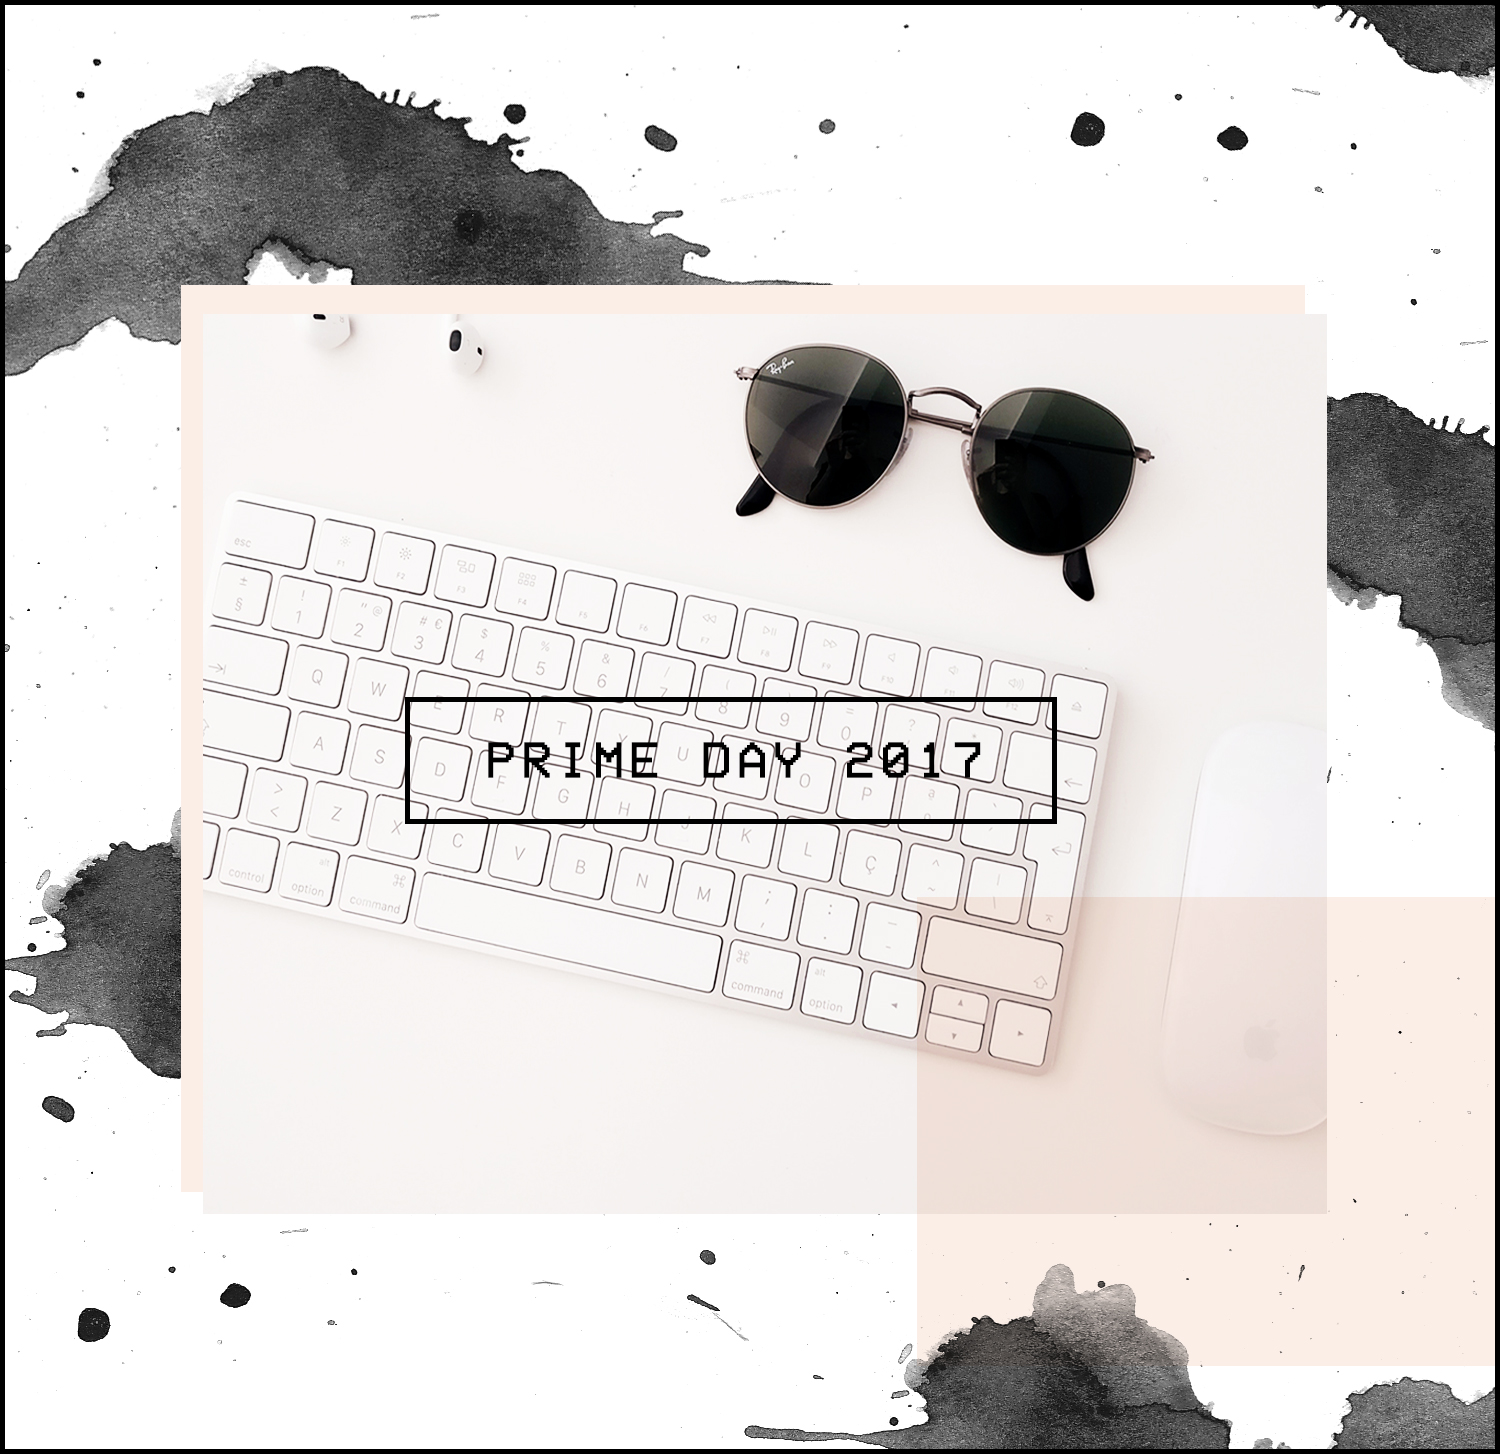 amazon prime day is the sale of Summer, fashionlush, fashion finds amazon